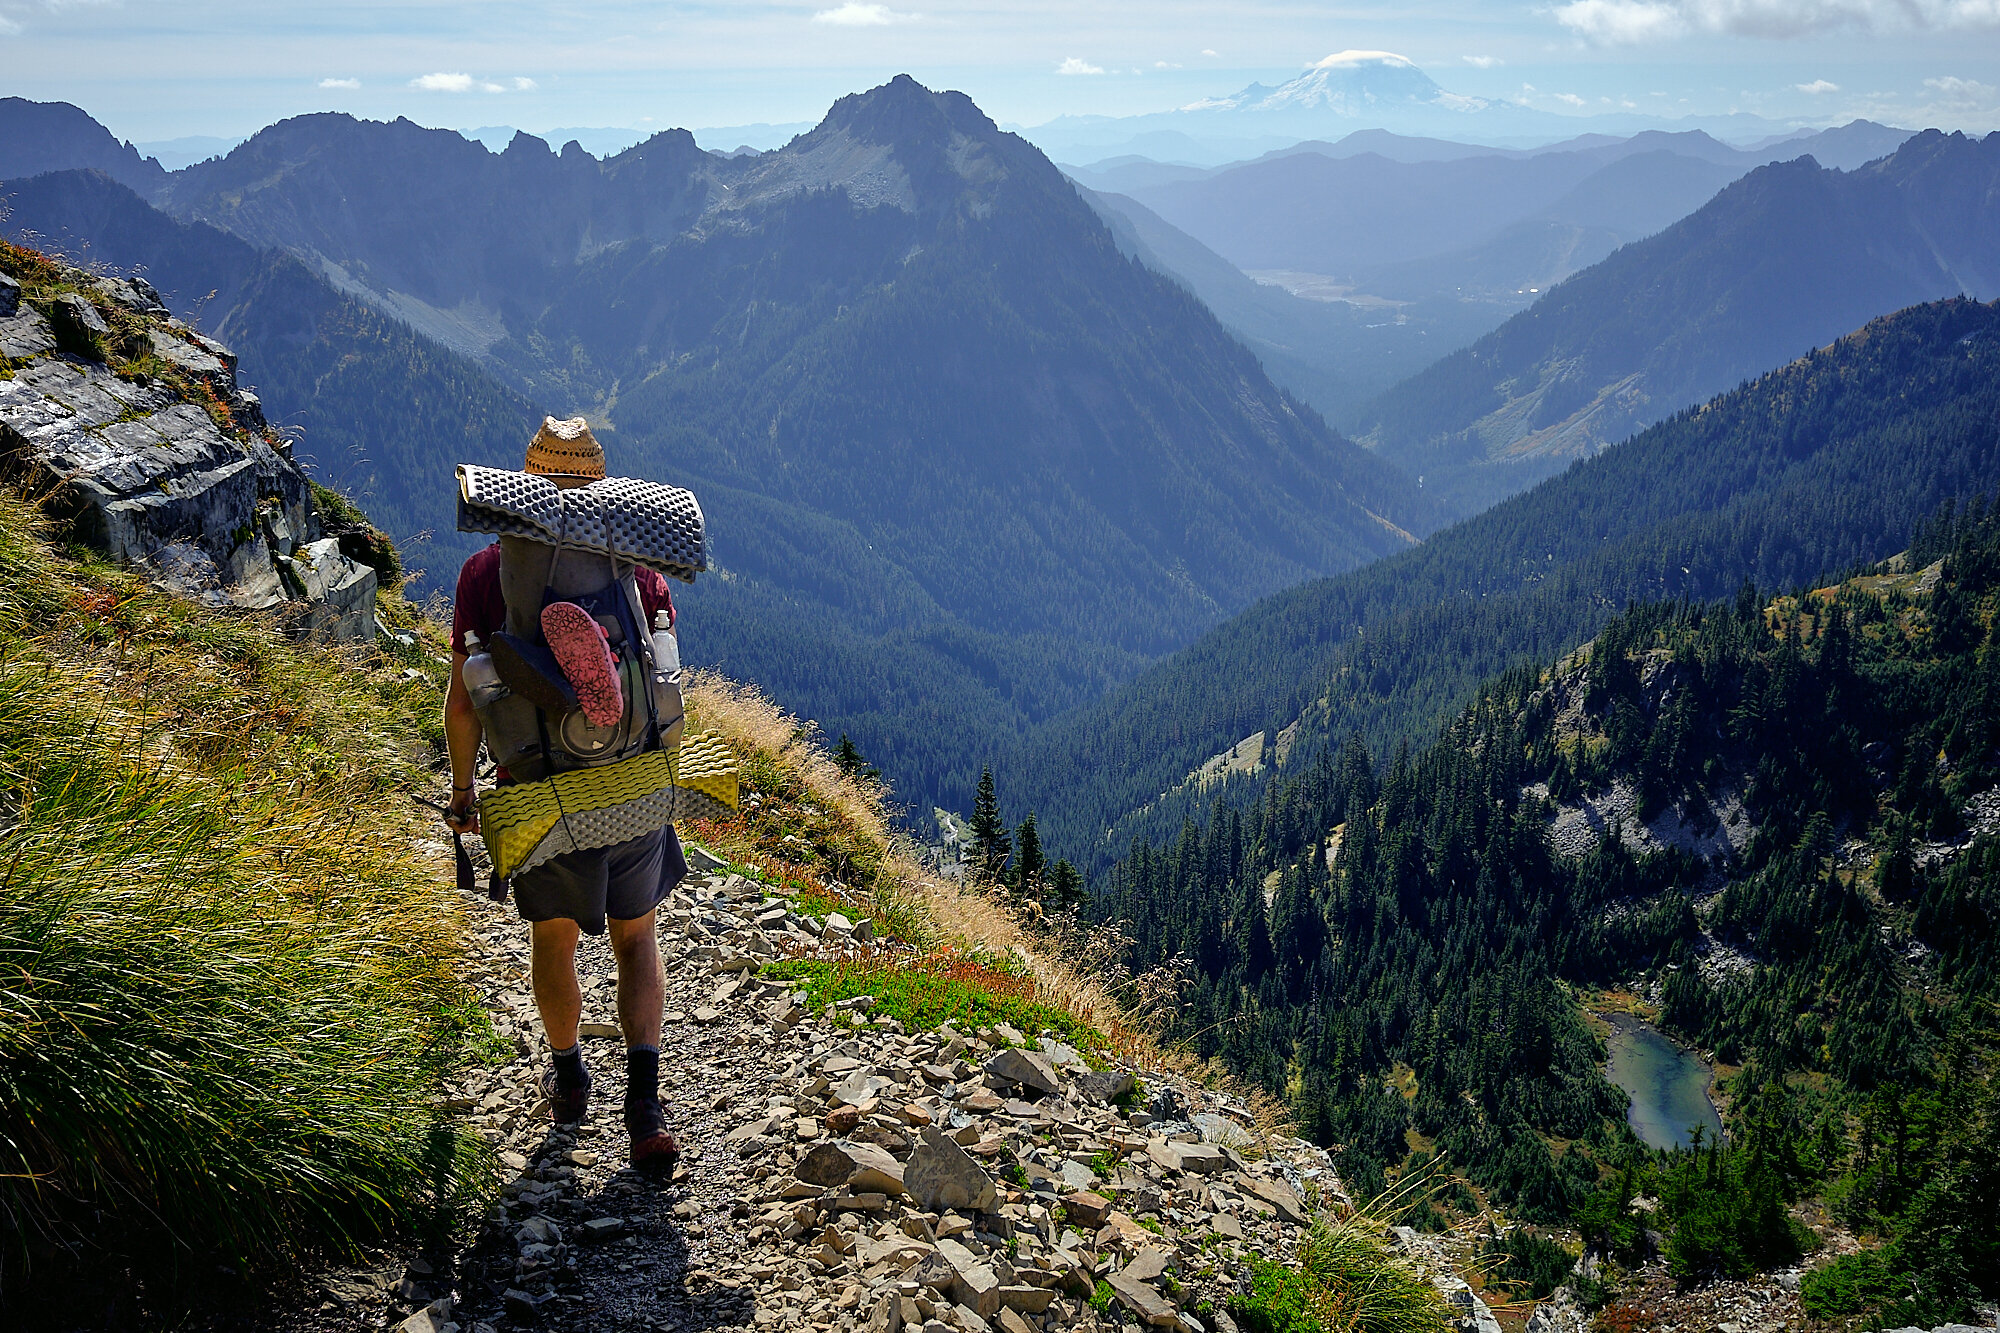  Lebowski on a ridgewalk above Snoqualmie Pass. Mt. Rainier is visible in the background. | 9/25/19 Mile 2,404.5 5,550' 